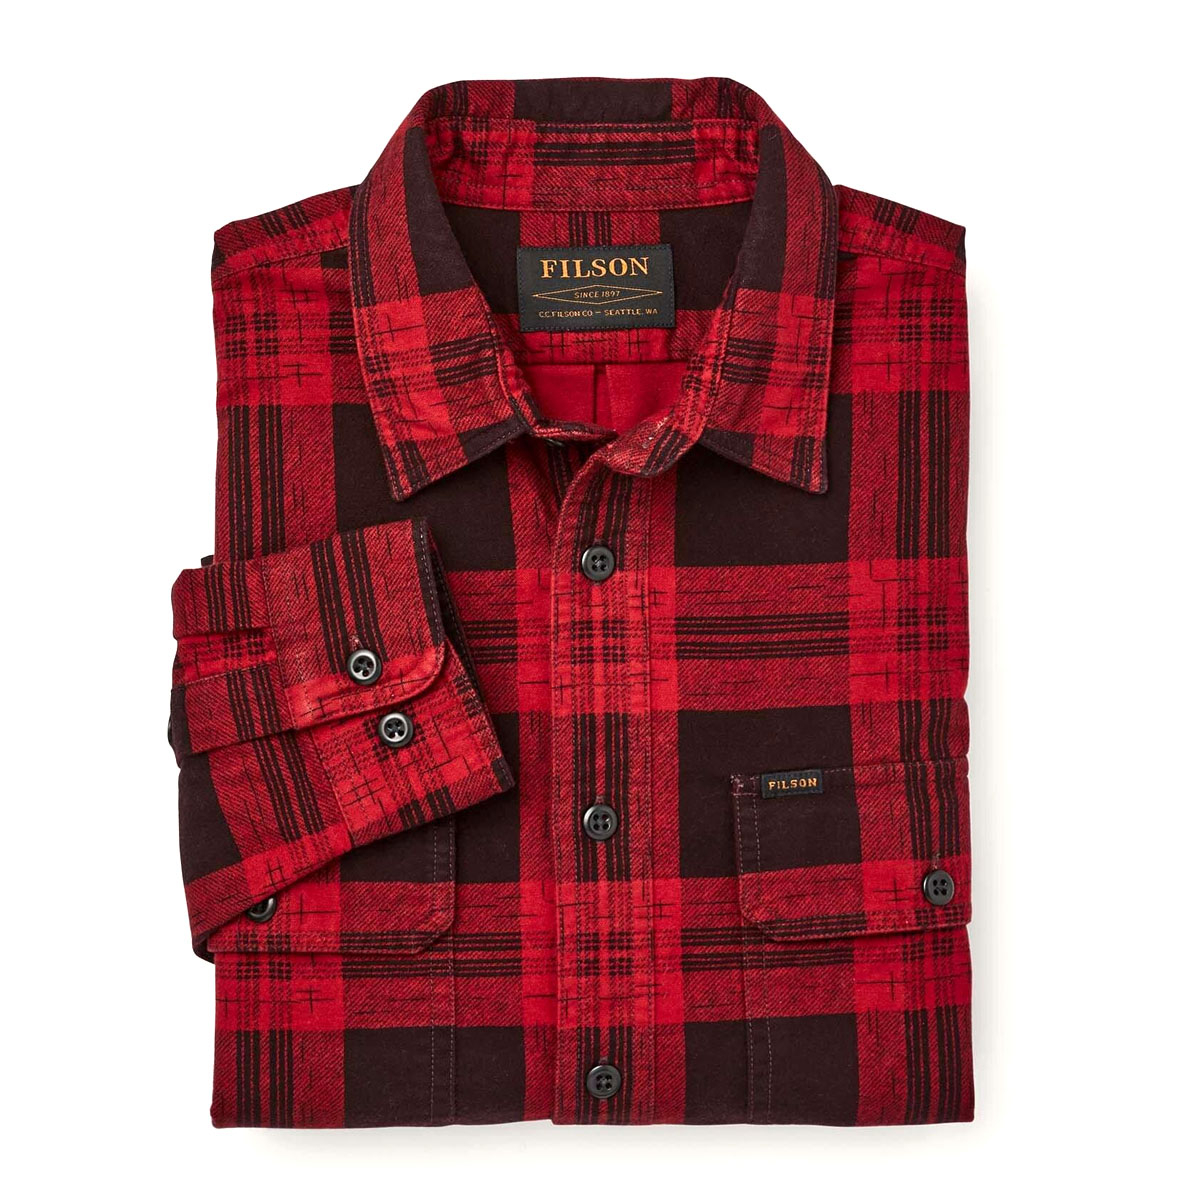 Filson Field Flannel Shirt Red Bark Plaid, comfortable and as soft as it is strong